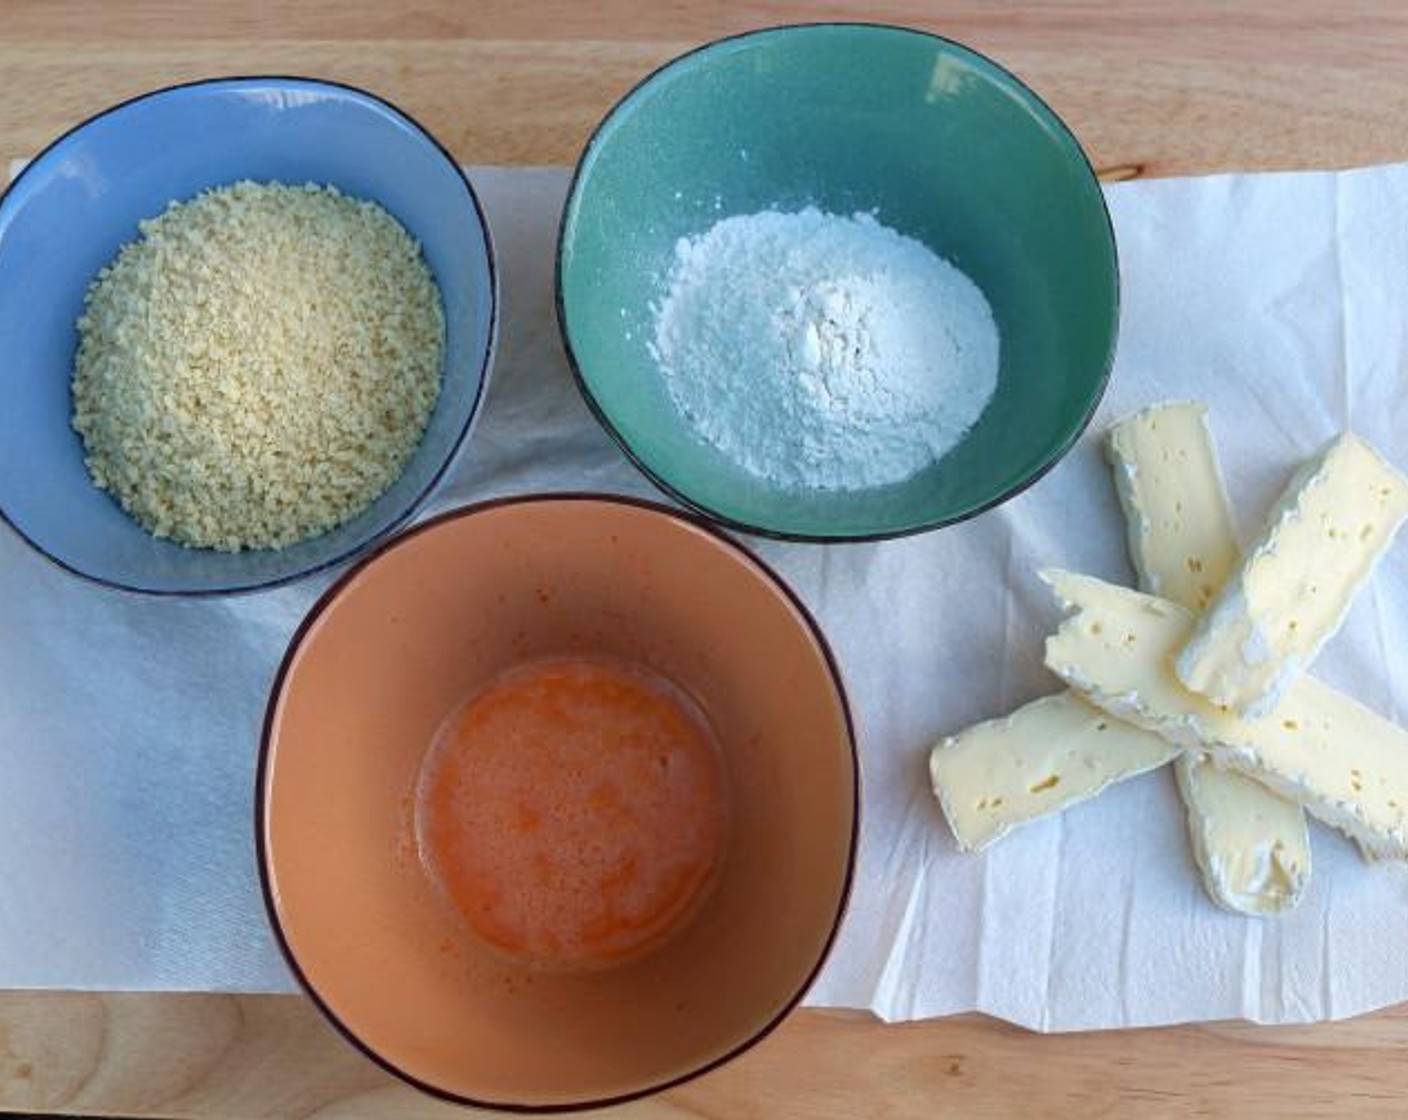 step 4 Cut the Ripe Camembert (2 cups) into cubes or slices, bread twice with All-Purpose Flour (to taste), egg mixture and Panko Breadcrumbs (to taste) (press the first coating of panko onto the cheese, lightly dip the camembert into the crumbs for the second coating).